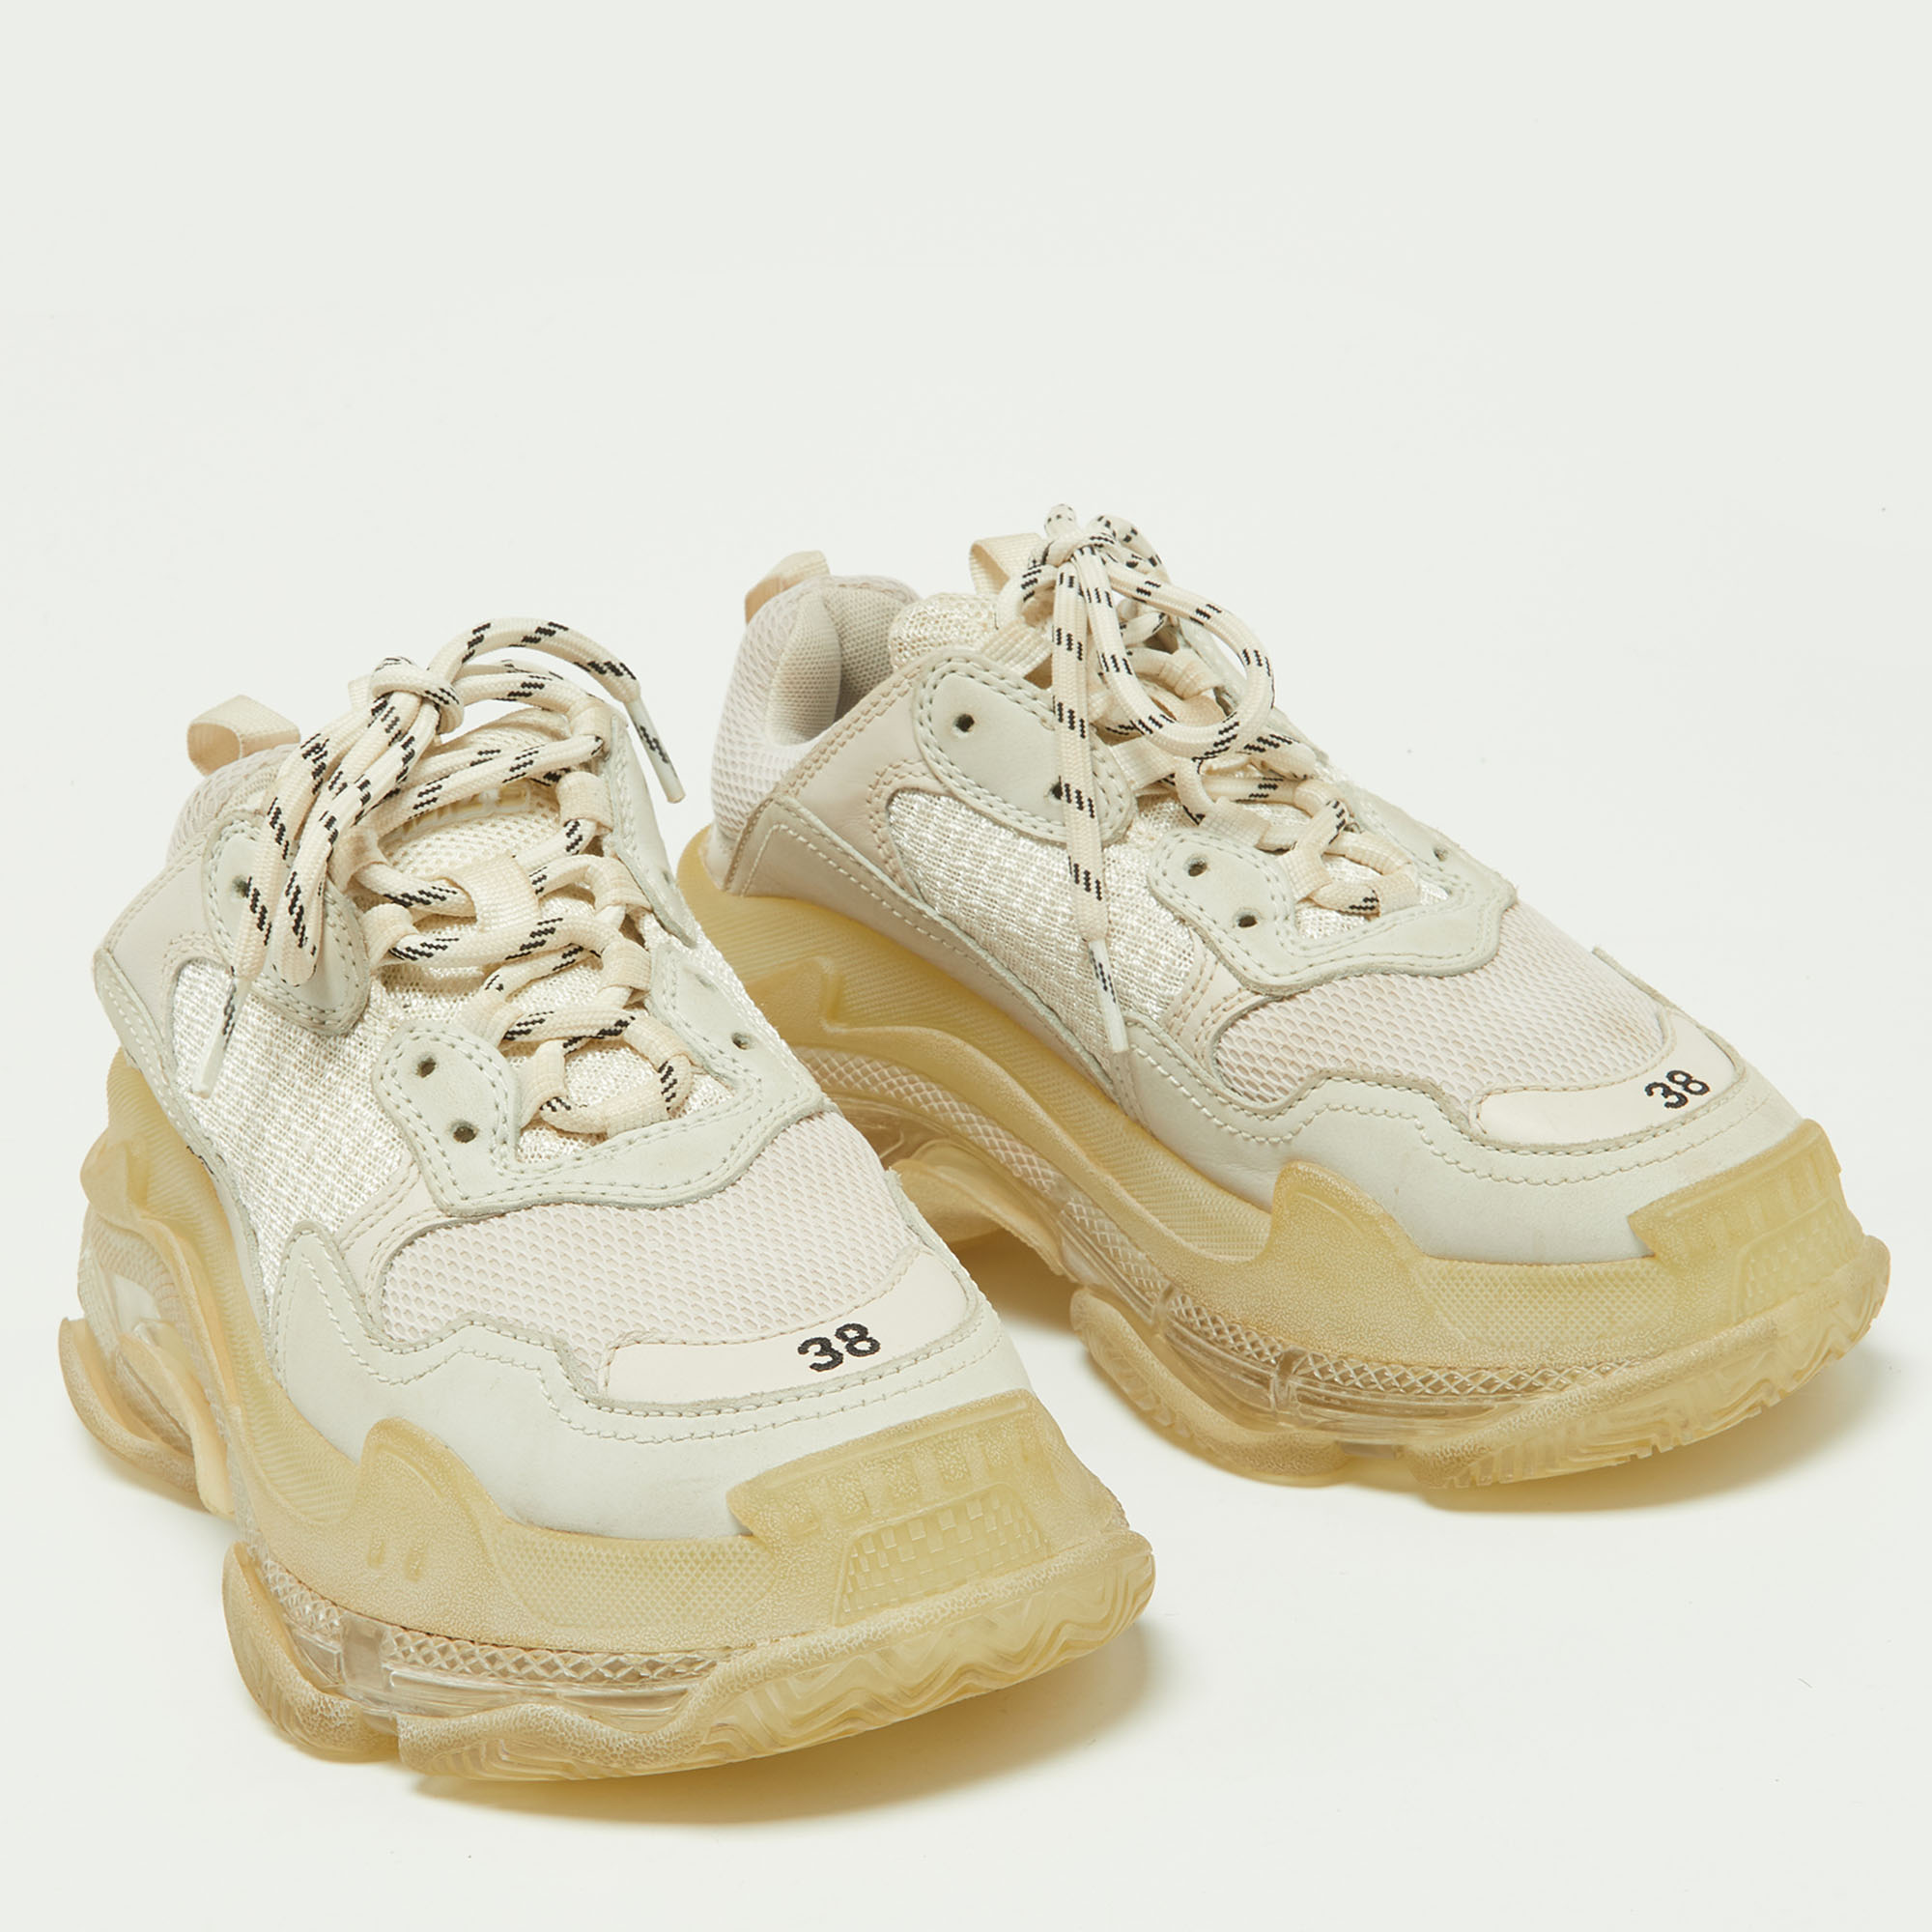 Balenciaga Two Tone Leather And Mesh Triple S Clear Sneakers Size 38